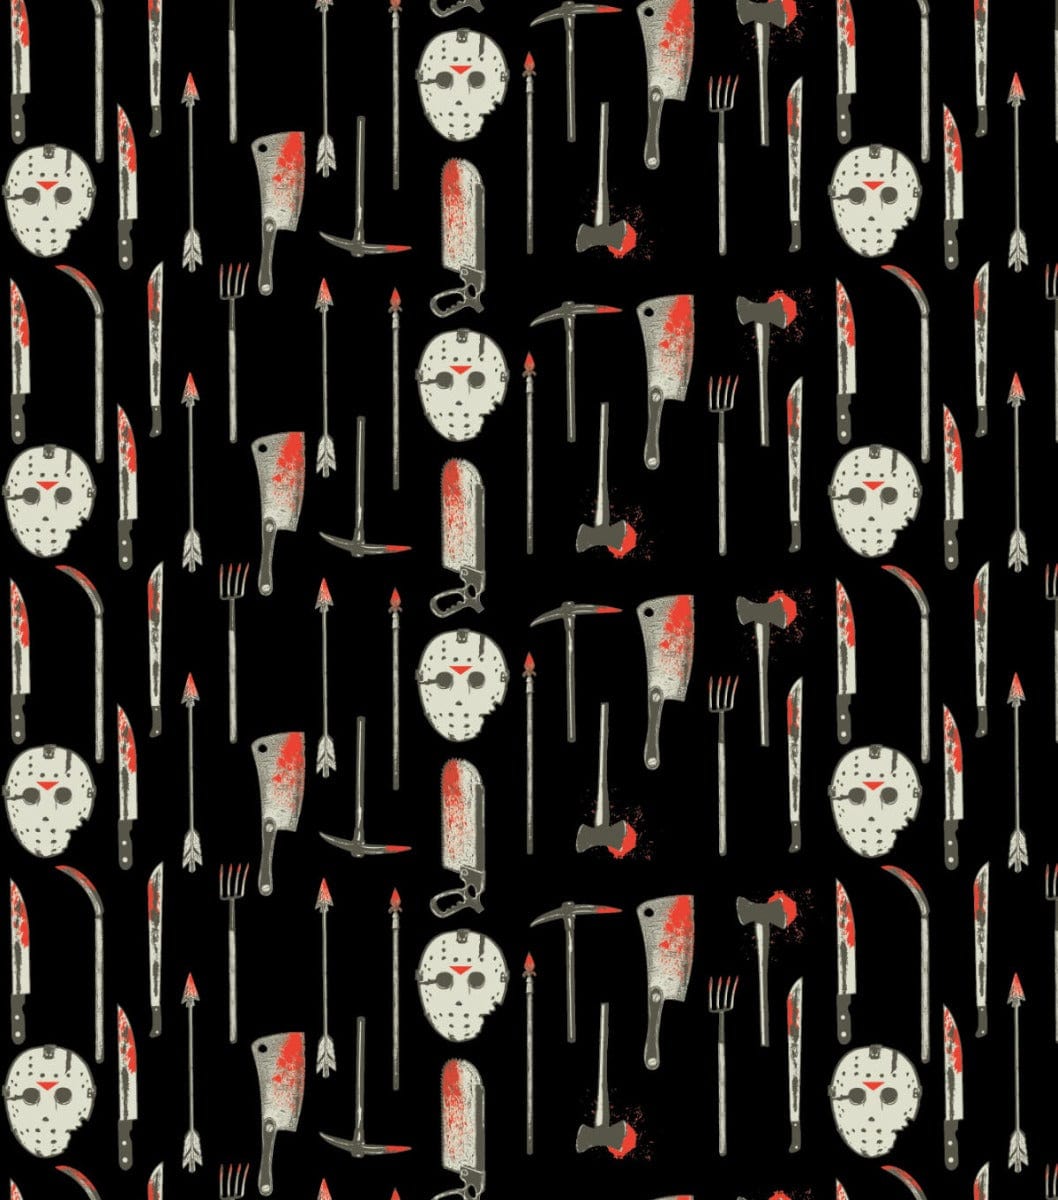 Friday The 13th Weapons and Masks Fabric